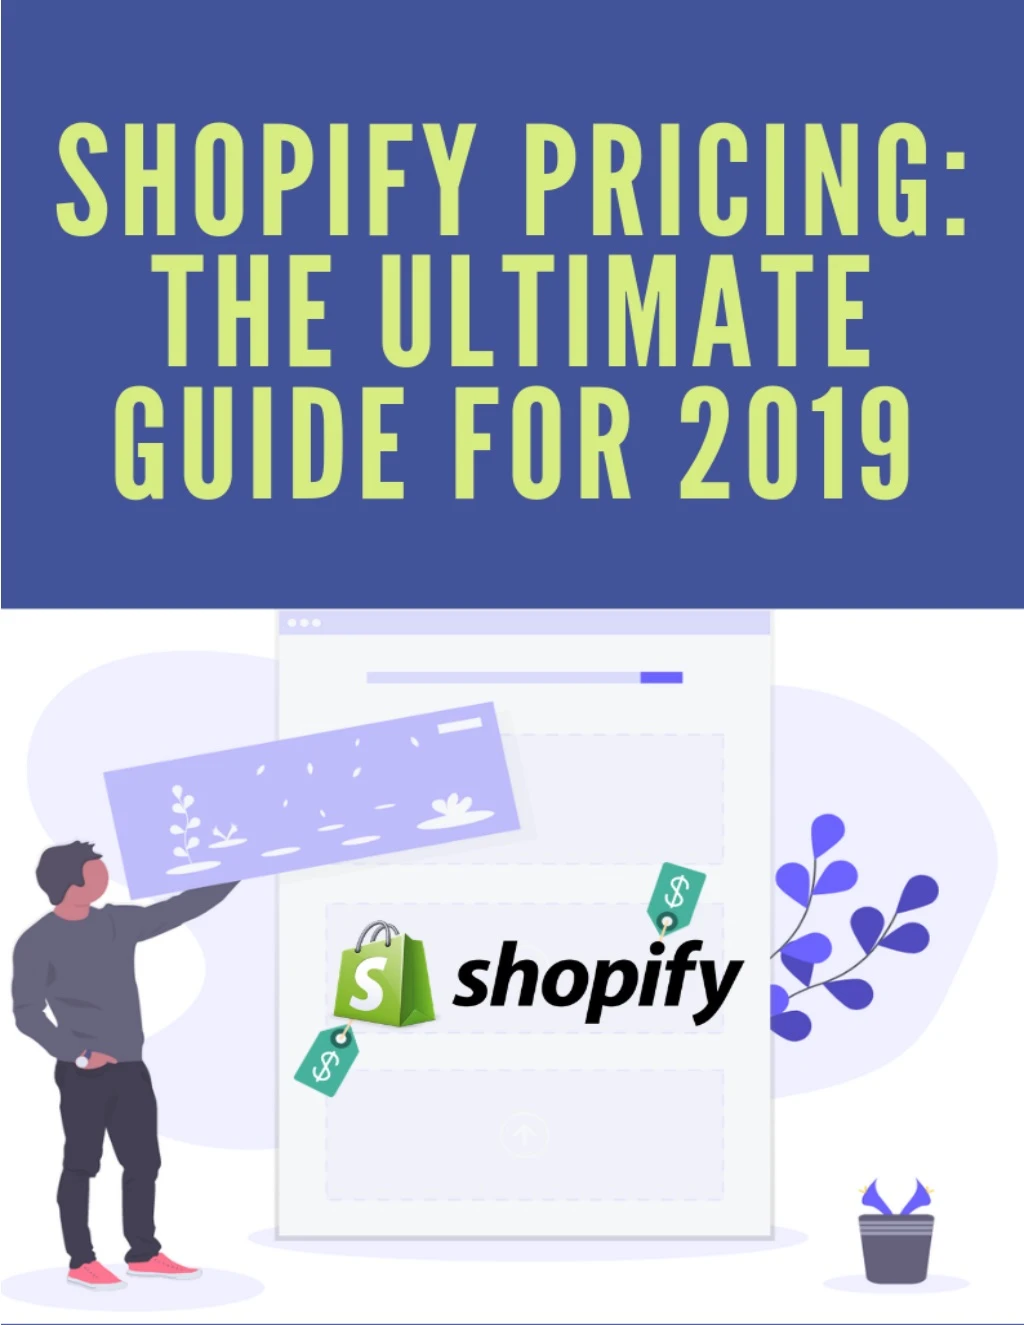 shopify pricing the ultimate guide for 2019